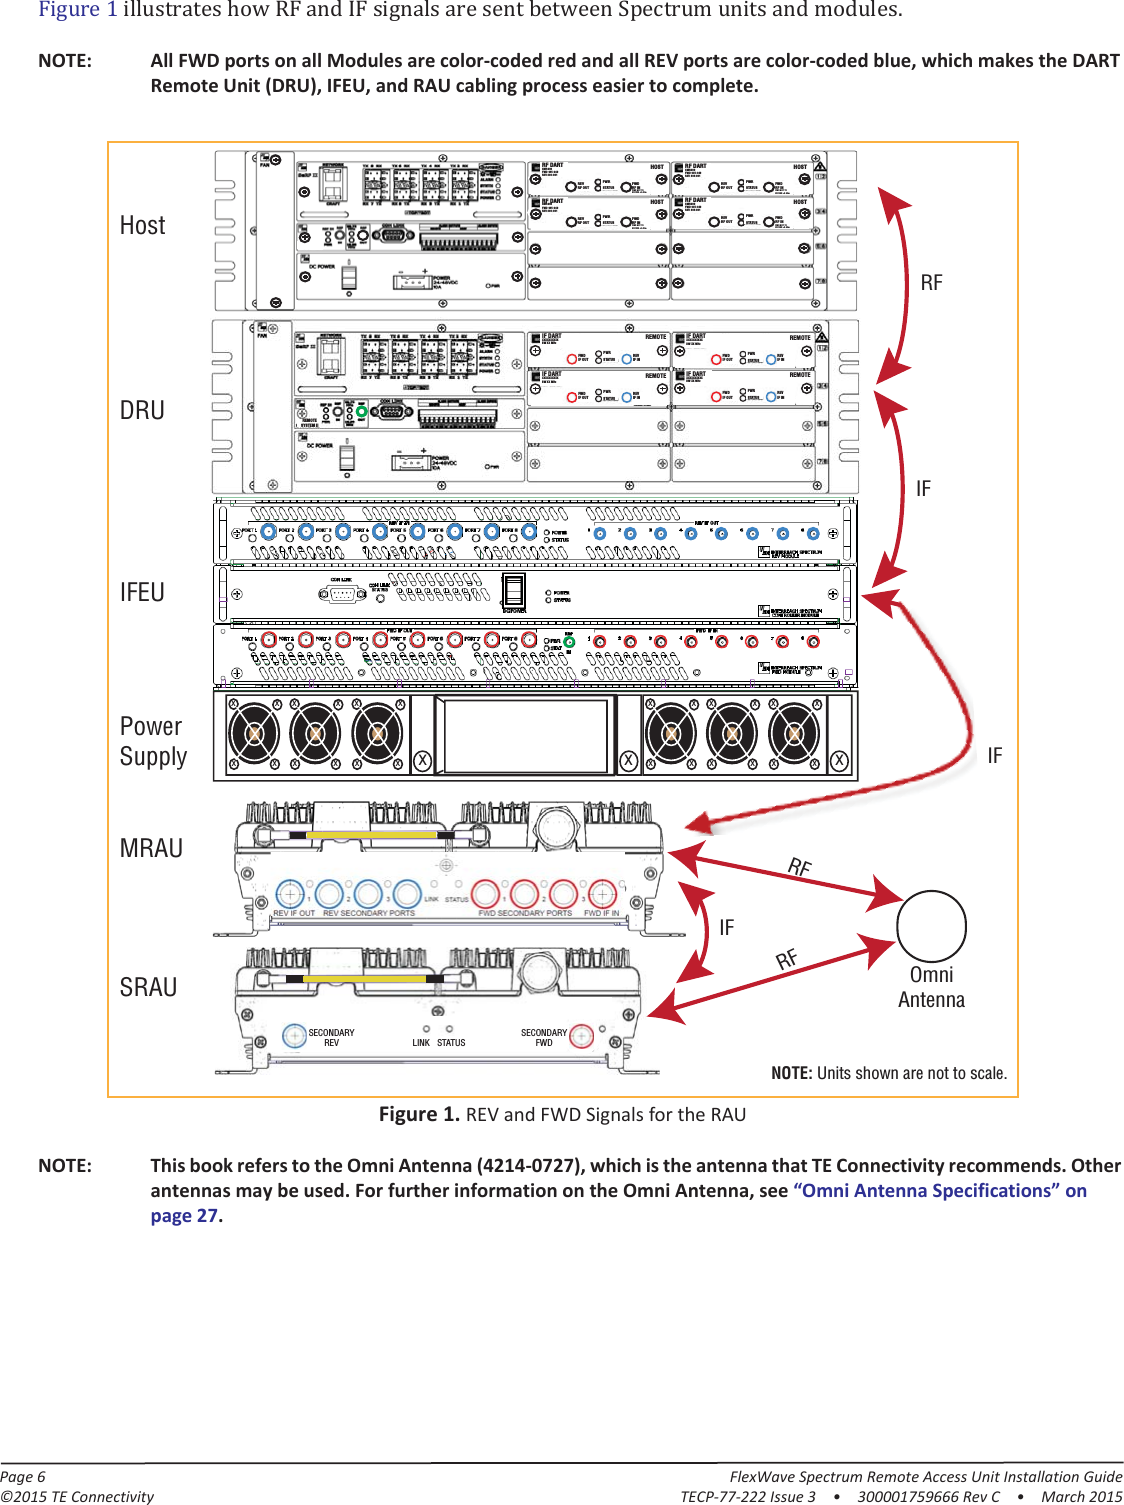 Page 6 FlexWave Spectrum Remote Access Unit Installation Guide©2015 TE Connectivity TECP-77-222 Issue 3  •  300001759666 Rev C  • March 2015Figure  1 illustrates how RF and IF signals are sent between Spectrum units and modules.LINK STATUSSECONDARYREVSECONDARYFWDSECONDARYREVSECONDARYFWDLINK STATUSREV IF OUT REV  SECONDARY  PORTS   1                 2                 3FWD  SECONDARY  PORTS   1                 2                 3FWD IF INLINK STATUSHostSRAUMRAUPowerSupplyIFEUDRUIFRFOmniAntennaRFRFxx xxxx xxxx xxxxx xxxx xxxx xxxxREMOTESYSTEM IIIF DARTXXXXXXXXXXBW XX MHzFWDIF OUTREVIF INPWRSTATUSREMOTEIF DARTXXXXXXXXXXBW XX MHzFWDIF OUTREVIF INPWRSTATUSREMOTEIF DARTXXXXXXXXXXBW XX MHzFWDIF OUTREVIF INPWRSTATUSREMOTEIF DARTXXXXXXXXXXBW XX MHzFWDIF OUTREVIF INPWRSTATUSREMOTEIFIFHOSTSYSTEM IIRF DARTSMR900FWD 935-940REV 896-901REVRF OUTFWDRF INFWD NOT TOEXCEED +5 dBmPWRSTATUSHOSTRF DARTSMR900FWD 935-940REV 896-901REVRF OUTFWDRF INFWD NOT TOEXCEED +5 dBmPWRSTATUSHOSTRF DARTSMR900FWD 935-940REV 896-901REVRF OUTFWDRF INFWD NOT TOEXCEED +5 dBmPWRSTATUSHOSTRF DARTSMR900FWD 935-940REV 896-901REVRF OUTFWDRF INFWD NOT TOEXCEED +5 dBmPWRSTATUSHOSTNOTE: Units shown are not to scale.NOTE: All FWD ports on all Modules are color-coded red and all REV ports are color-coded blue, which makes the DART Remote Unit (DRU), IFEU, and RAU cabling process easier to complete.Figure 1. REV and FWD Signals for the RAUNOTE: This book refers to the Omni Antenna (4214-0727), which is the antenna that TE Connectivity recommends. Other antennas may be used. For further information on the Omni Antenna, see “Omni Antenna Specifications” on page 27.